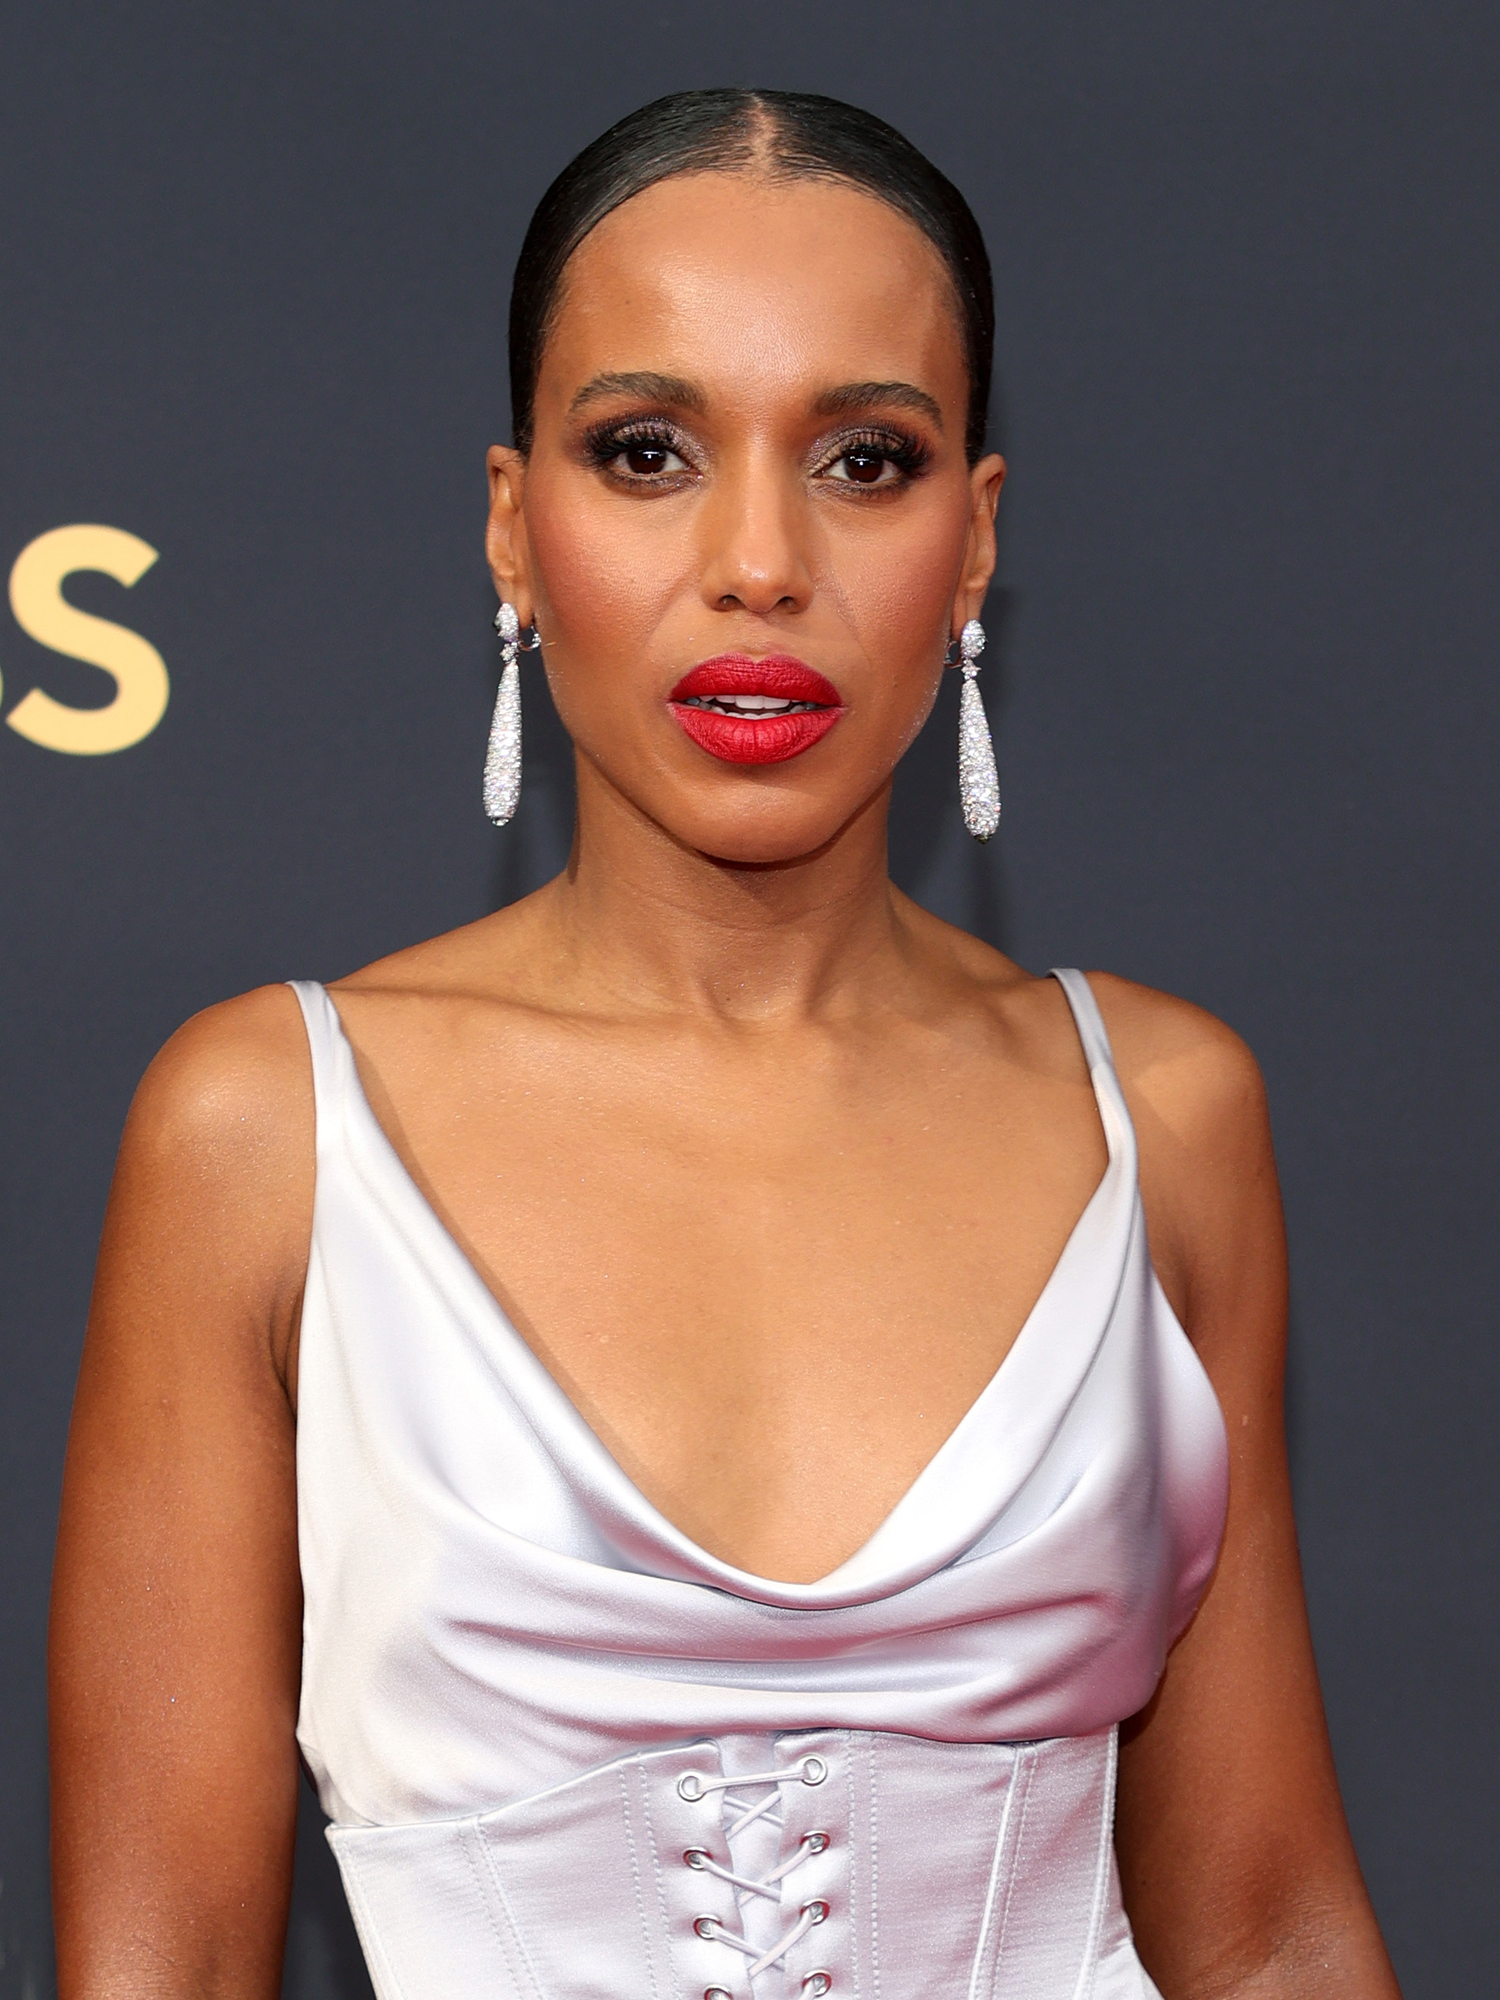 All of the Best Beauty Looks From the Emmys 2021 Red Carpet